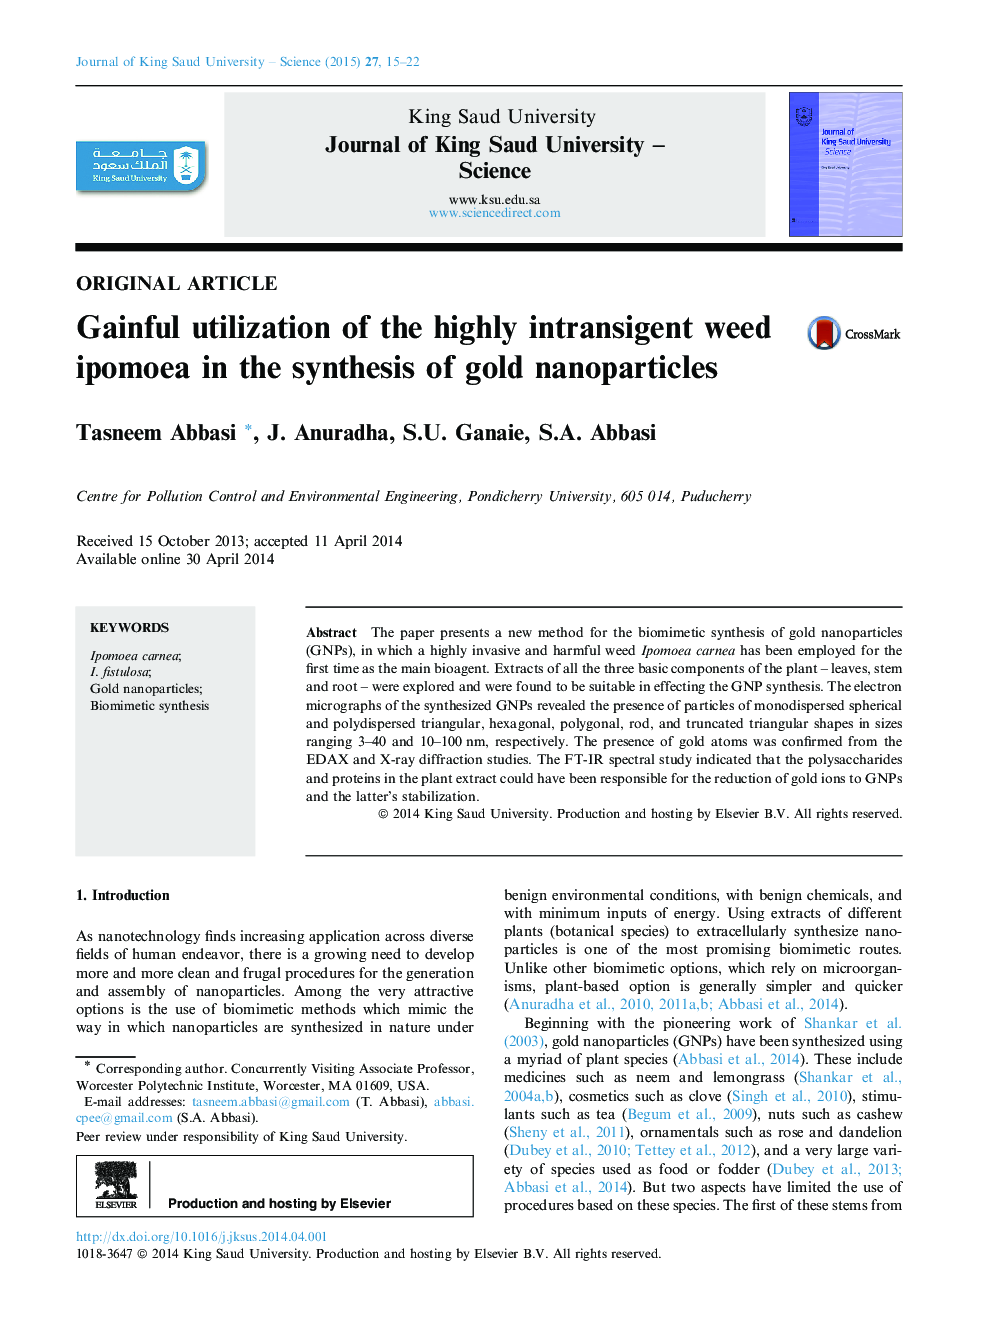 Gainful utilization of the highly intransigent weed ipomoea in the synthesis of gold nanoparticles 